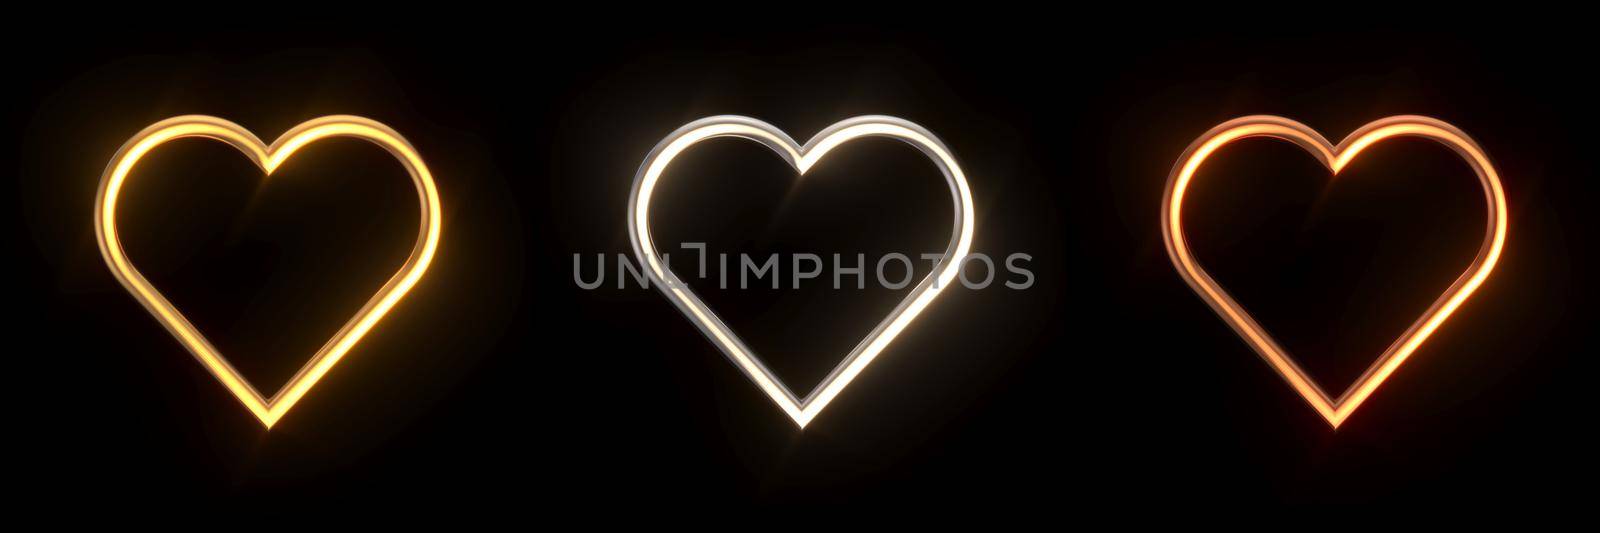 Gold, silver and bronze hearts 3D rendering illustration isolated on black background